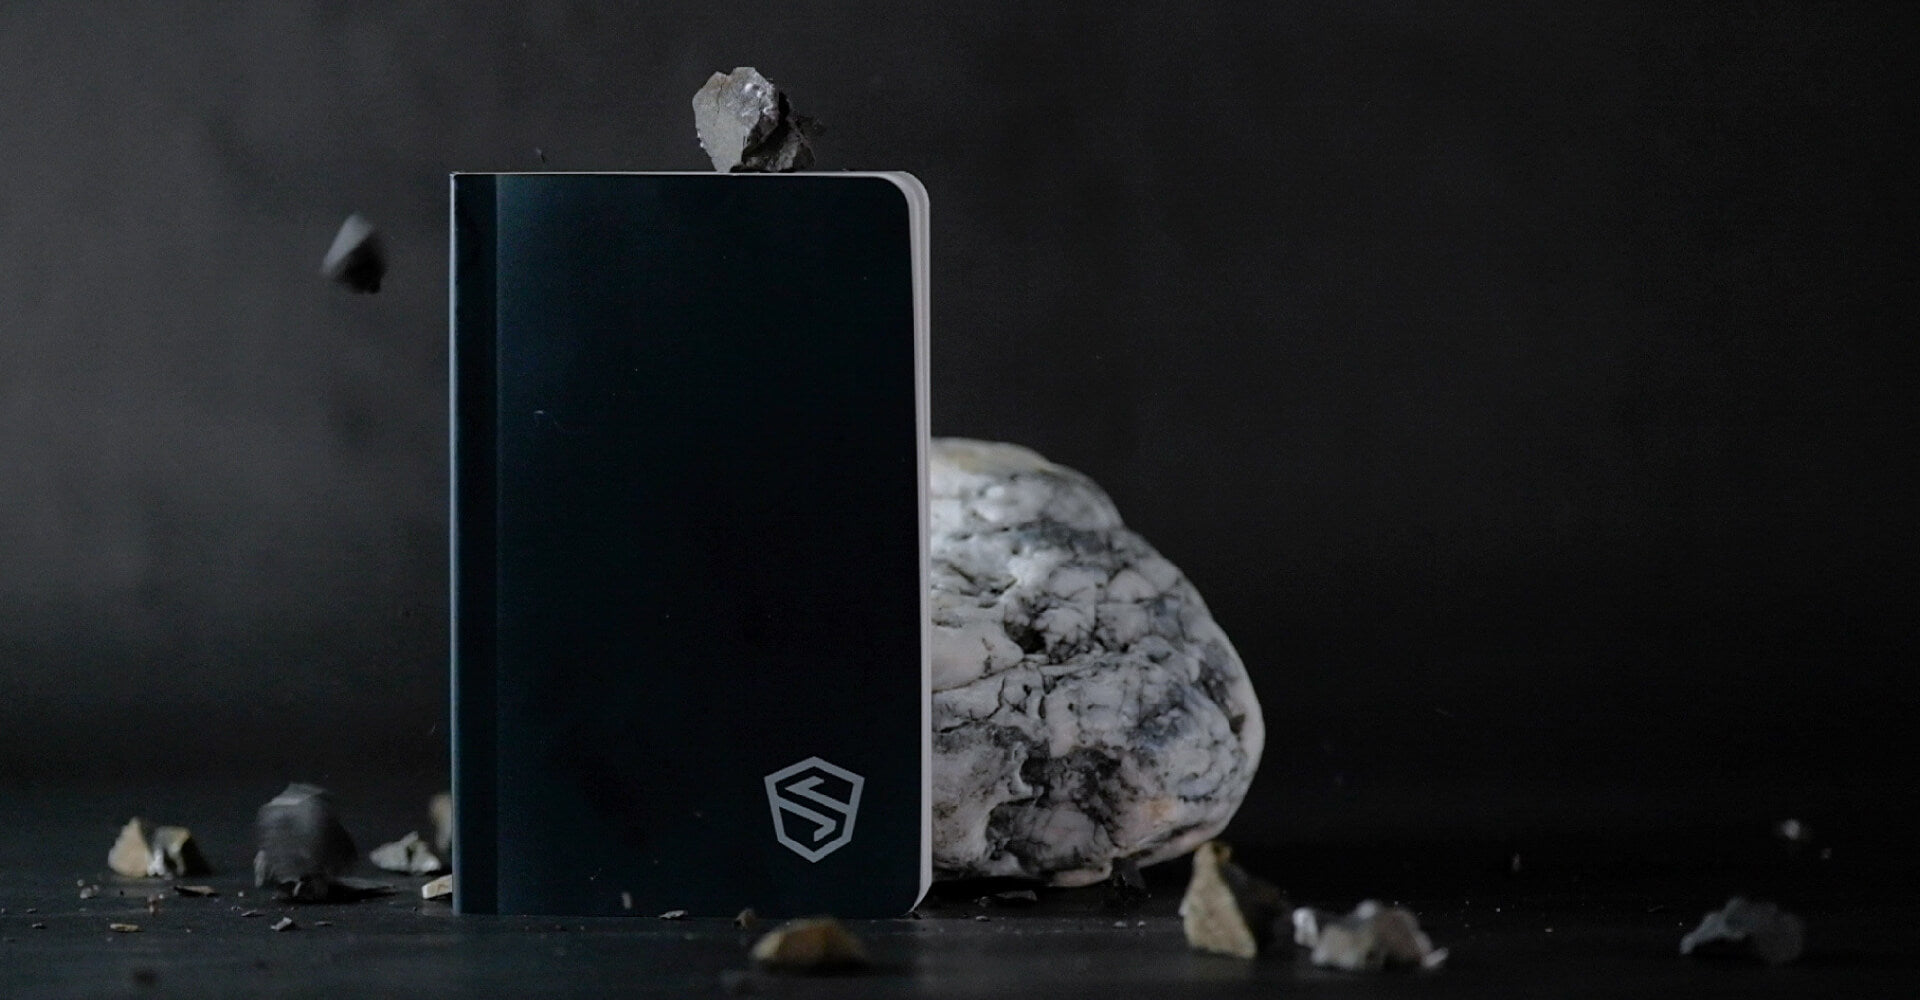 Shieldfolio Stonebook: Crypto Notebook for Securely Storing Seed Phrases and Private Keys